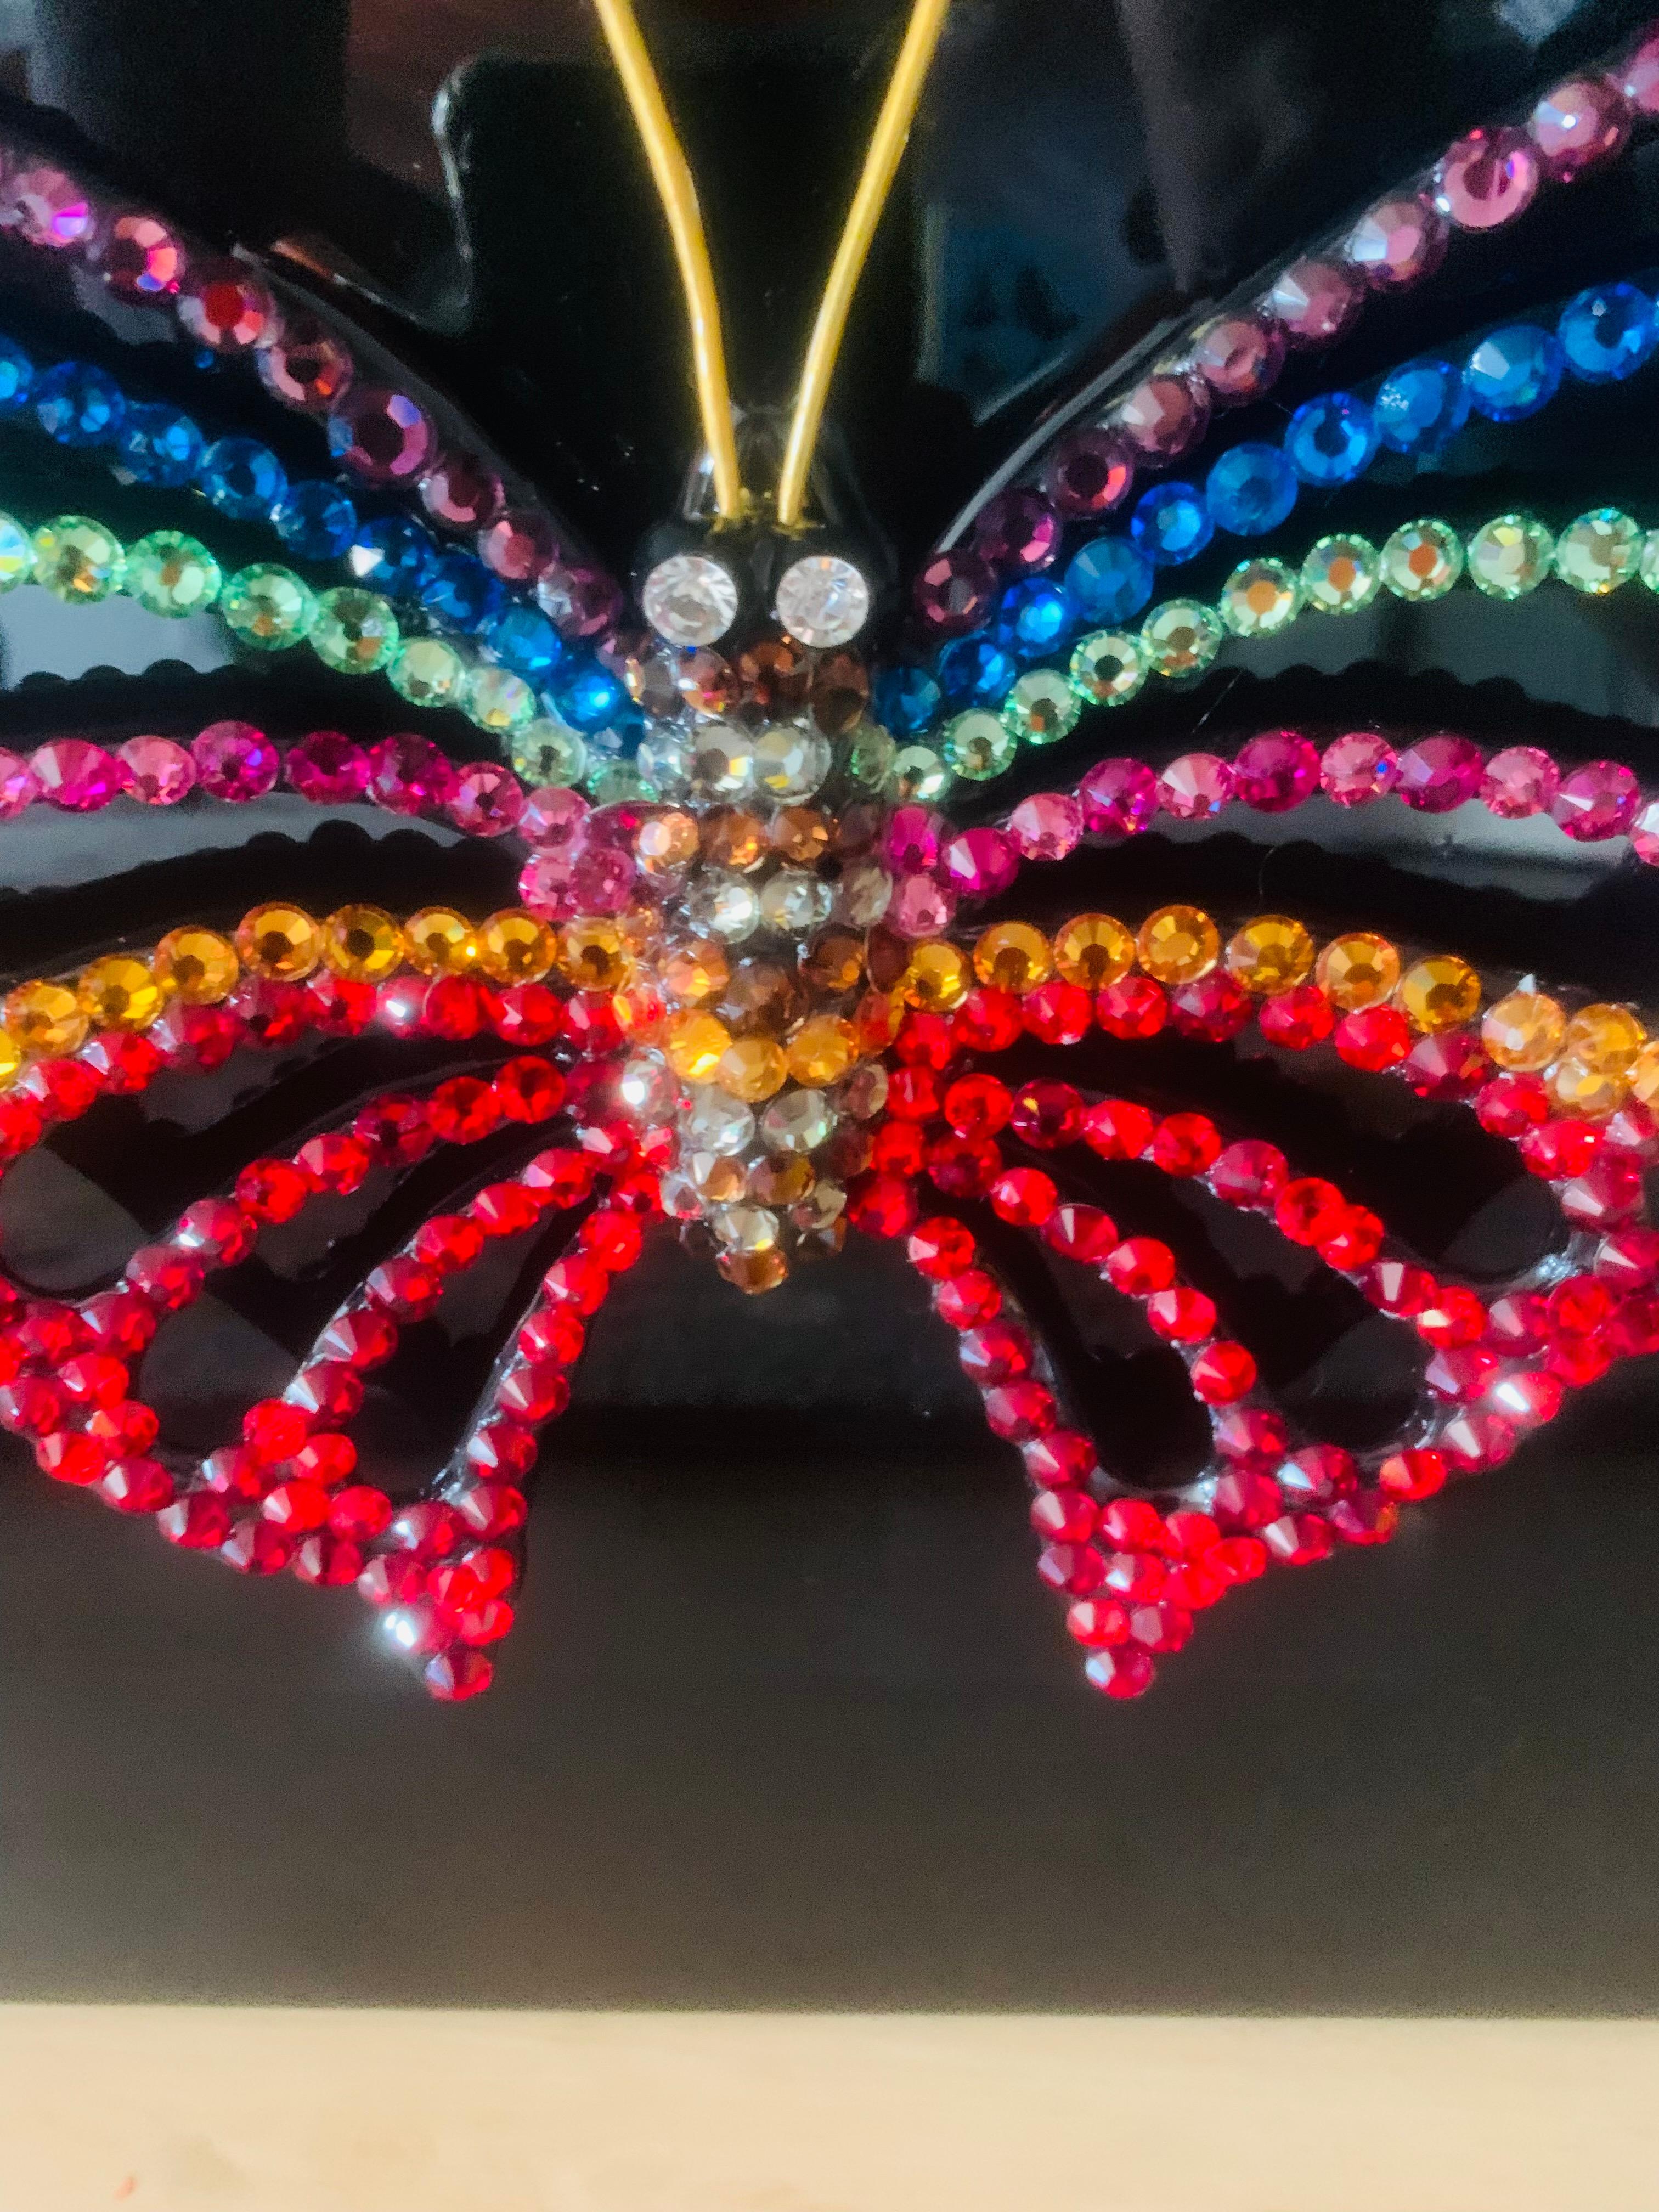 PRIDE BUTTERFLY (One of a Kind Swarovski Mixed Media Sculpture) 7